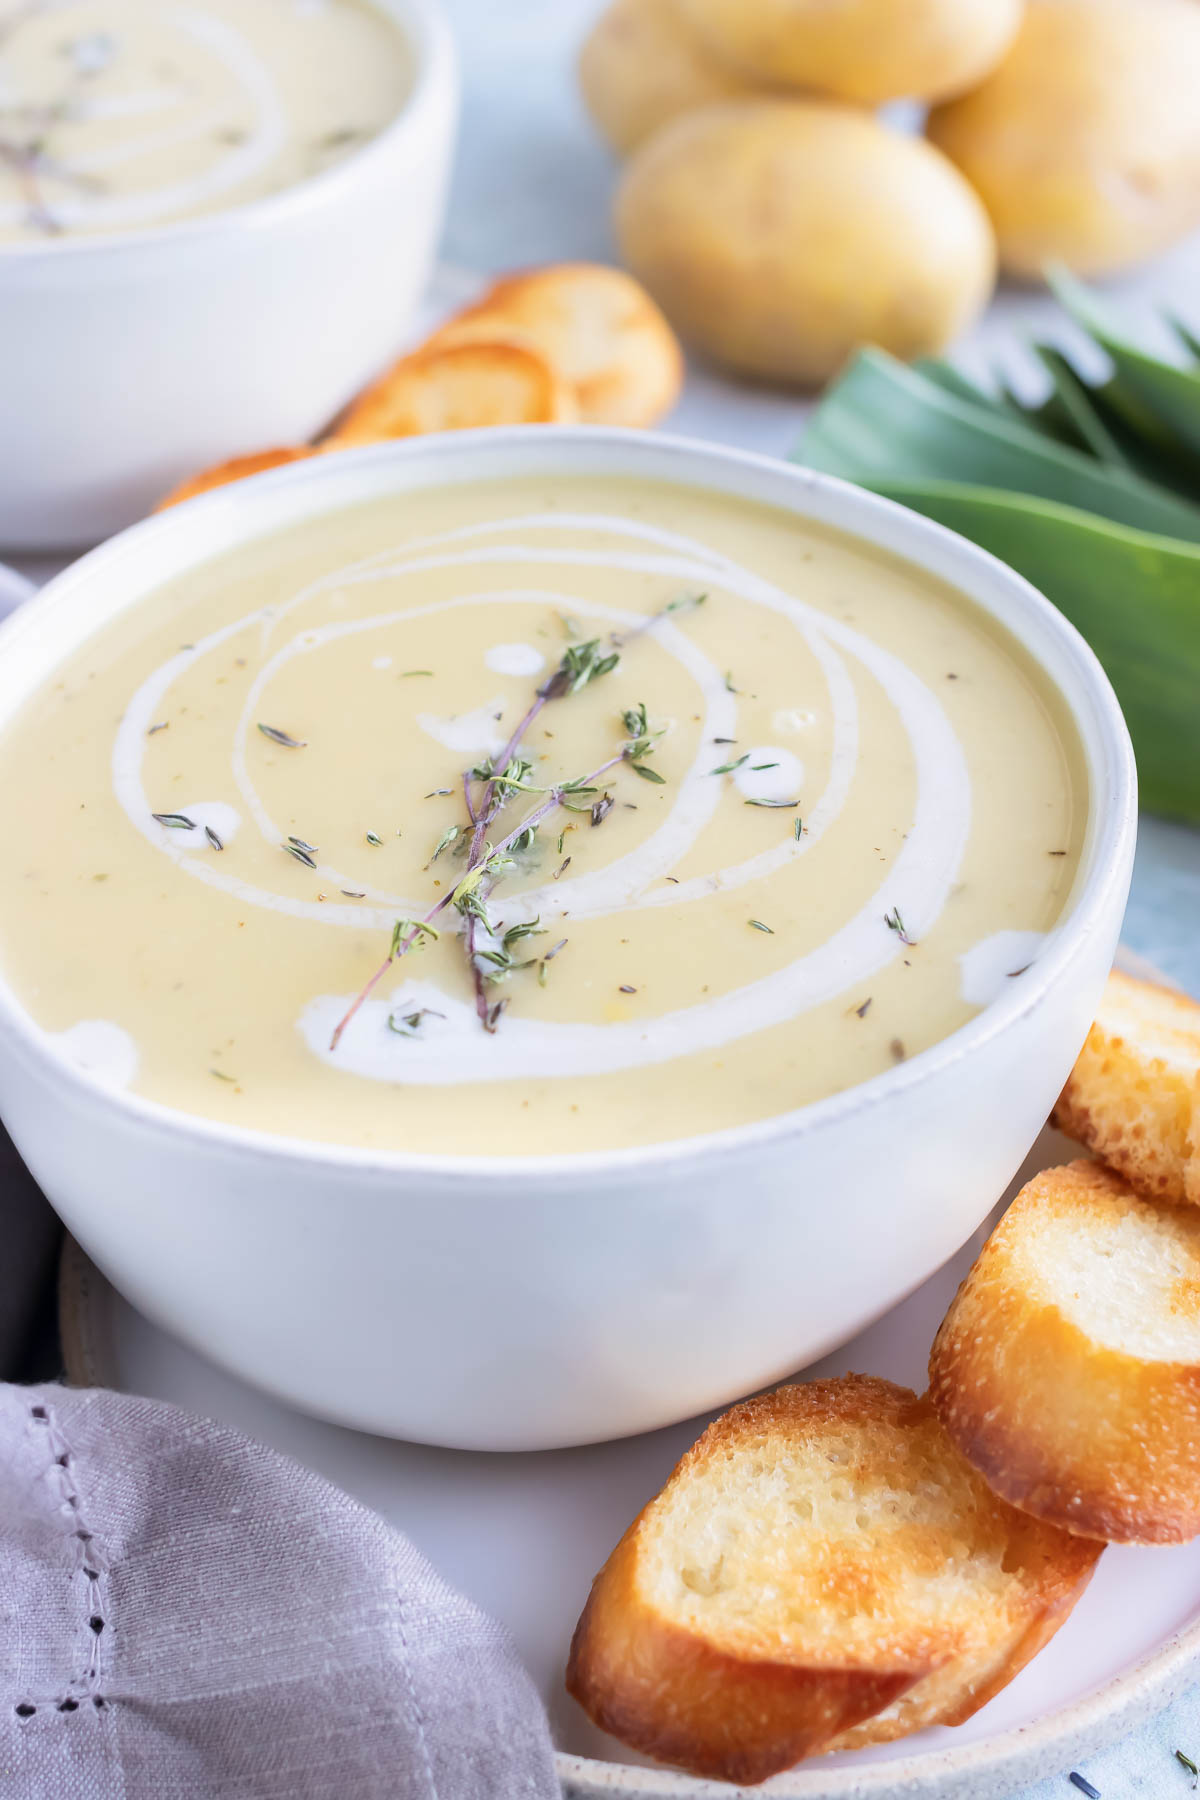 A large soup bowl full of potatoes and leeks blended into a soup being served with toasted baguette bread.